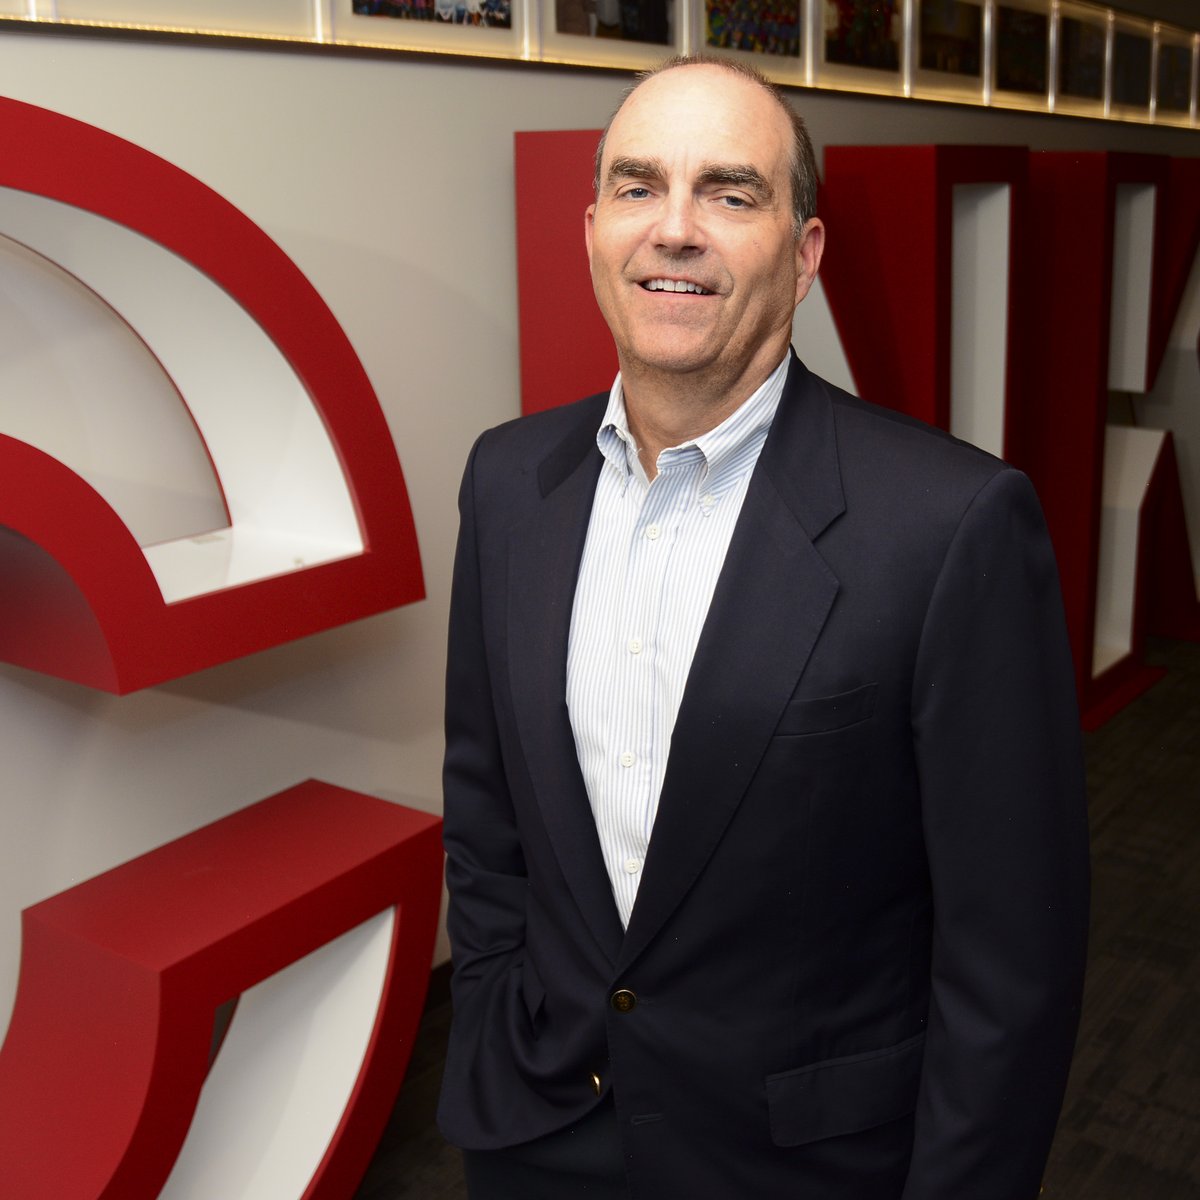 Video Cinemark CEO on how omicron could impact holiday box office